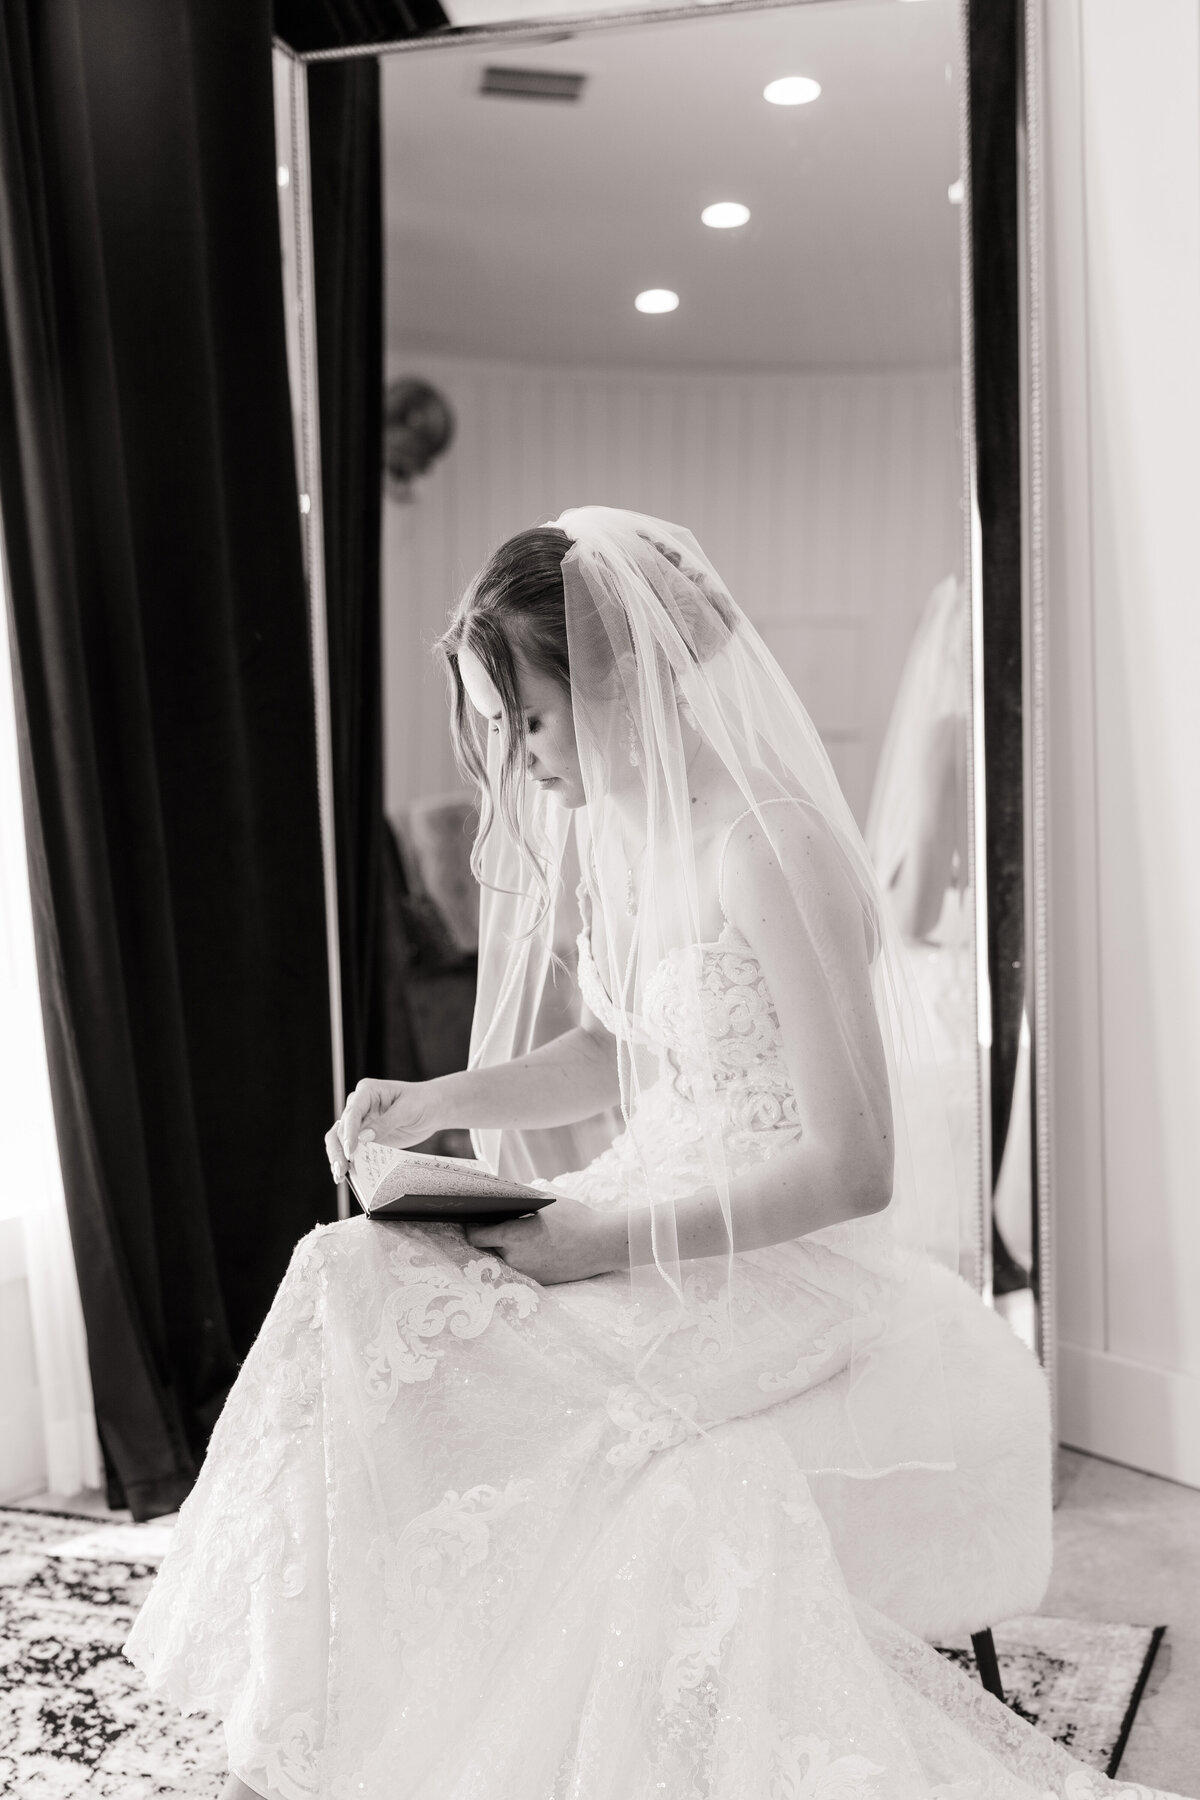 Bride reading letter from Groom while getting ready before wedding ceremony at The Ranch House